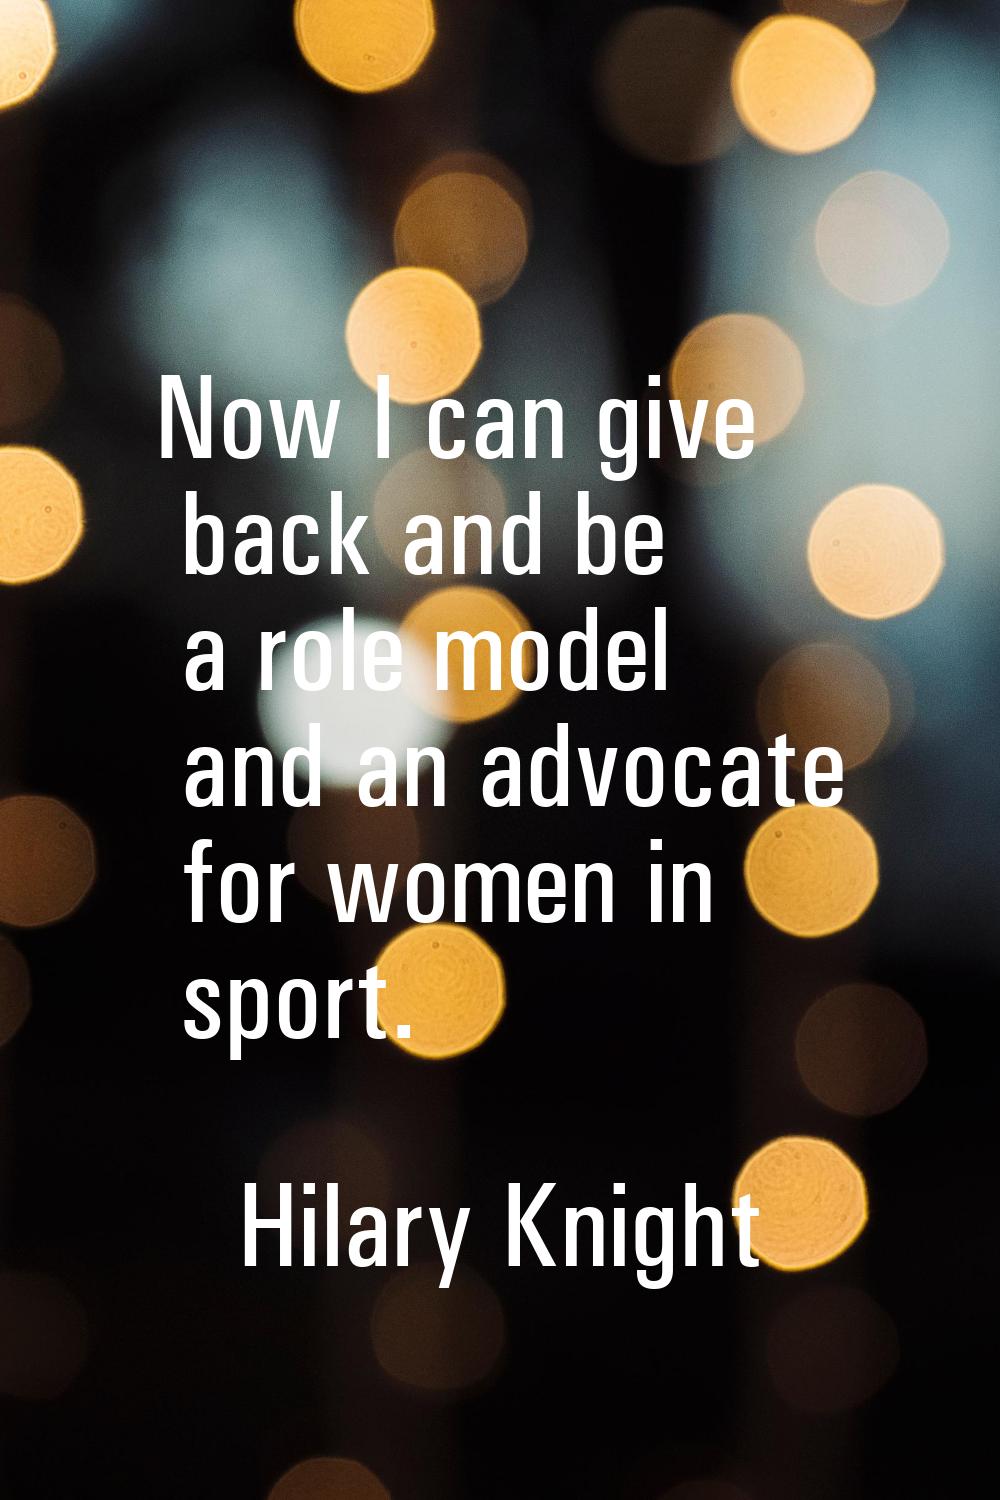 Now I can give back and be a role model and an advocate for women in sport.